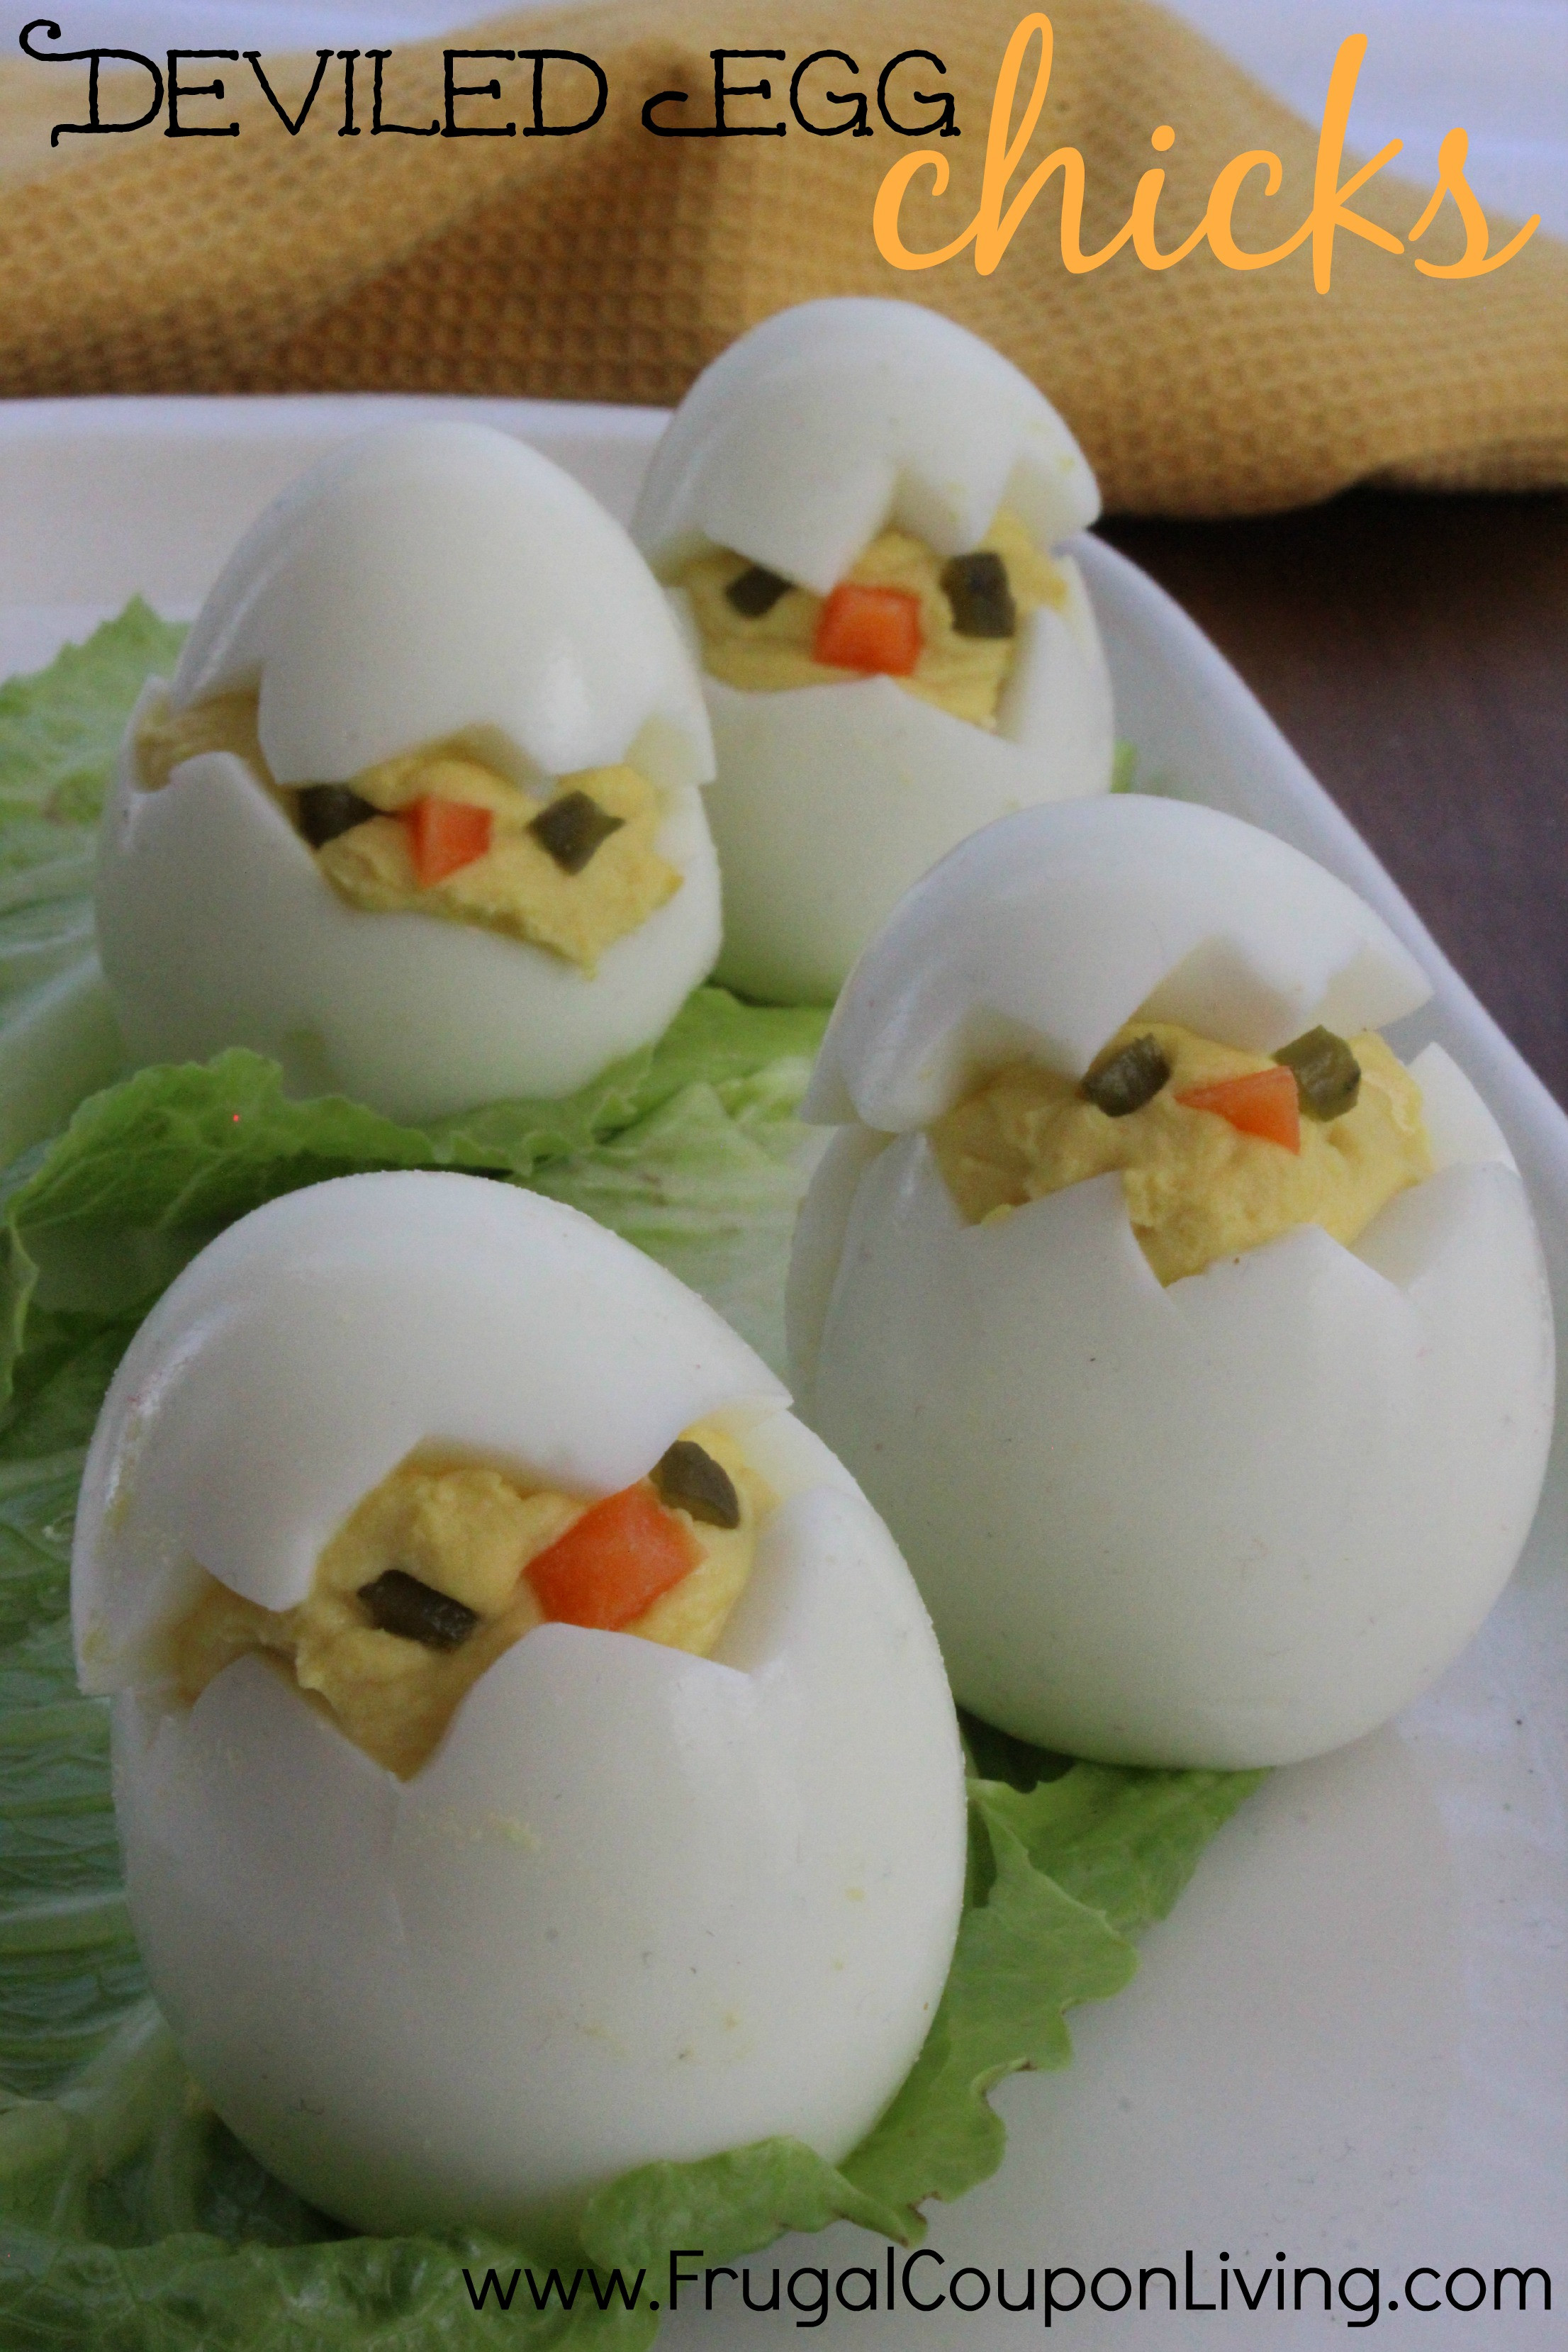 Easter Bunny Deviled Eggs
 Easter Deviled Egg Chicks Recipe Twist on the Norm